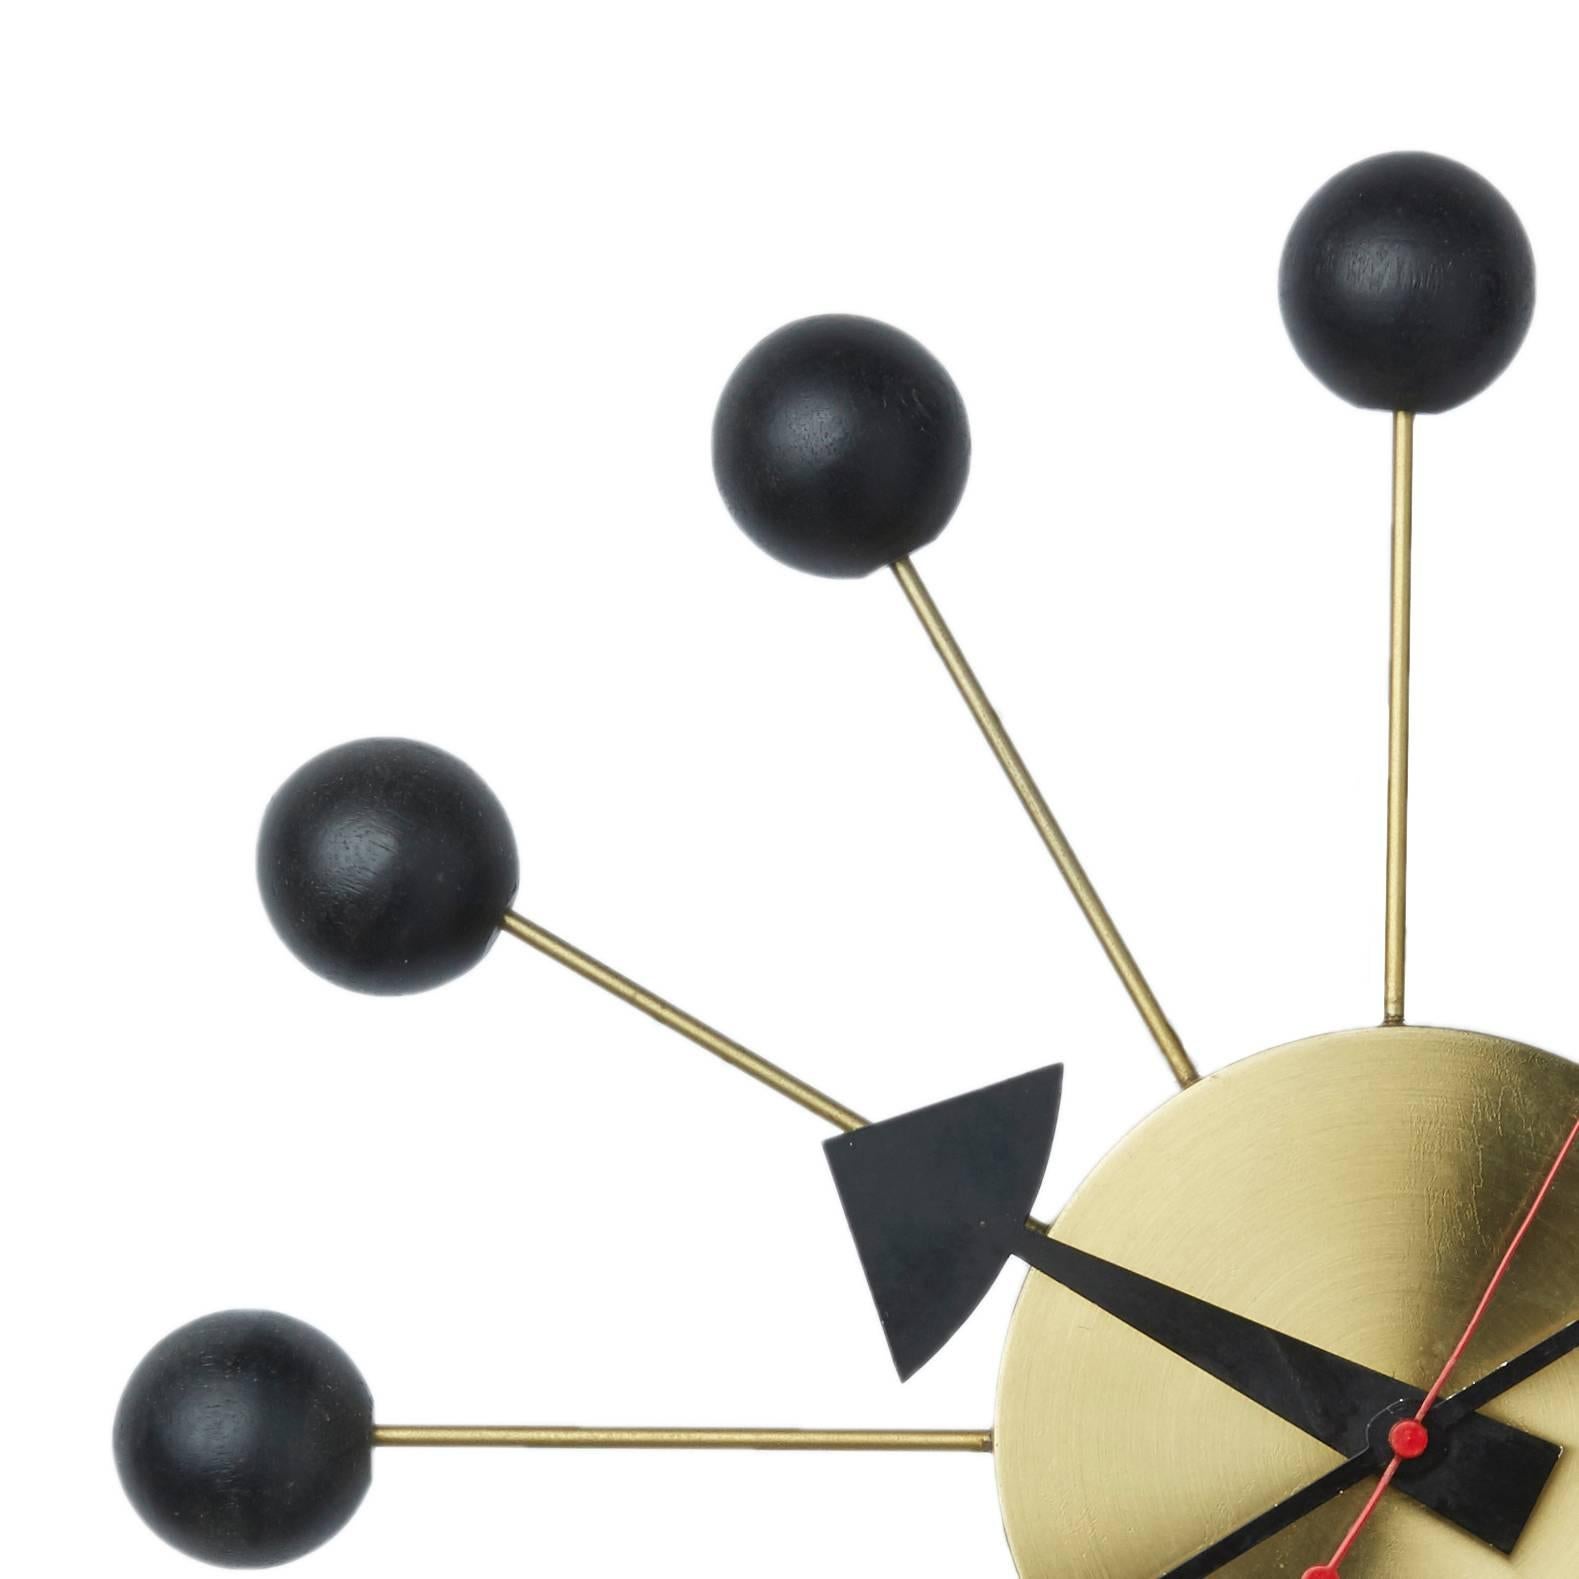 The Ball Clock, by George Nelson for Howard Miller, is one of his most iconic clock designs, originally designed and produced in the 1940s. 

This fine example, with 12 black balls on brass rods over a brass base, is in greater demand and harder